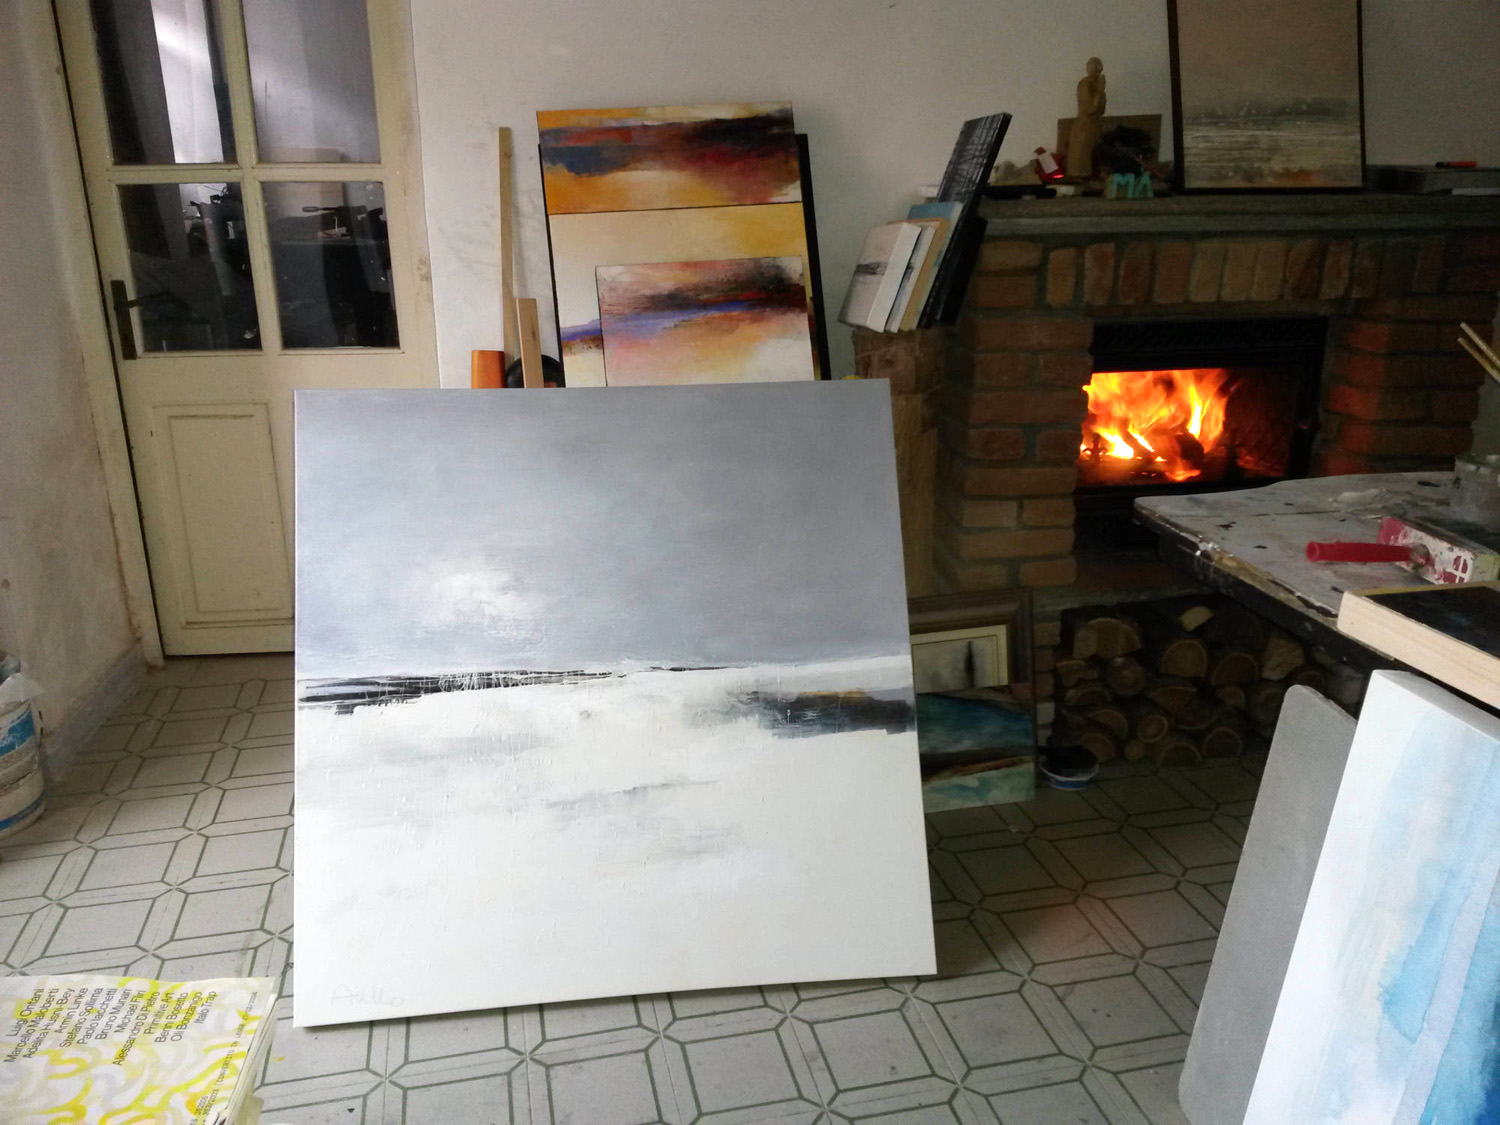 Running , the studio -cave of Sergio Aiello contemporary visual artist of Abstract Contemporary Landscape Paintings at https://www.sergioaiello.com